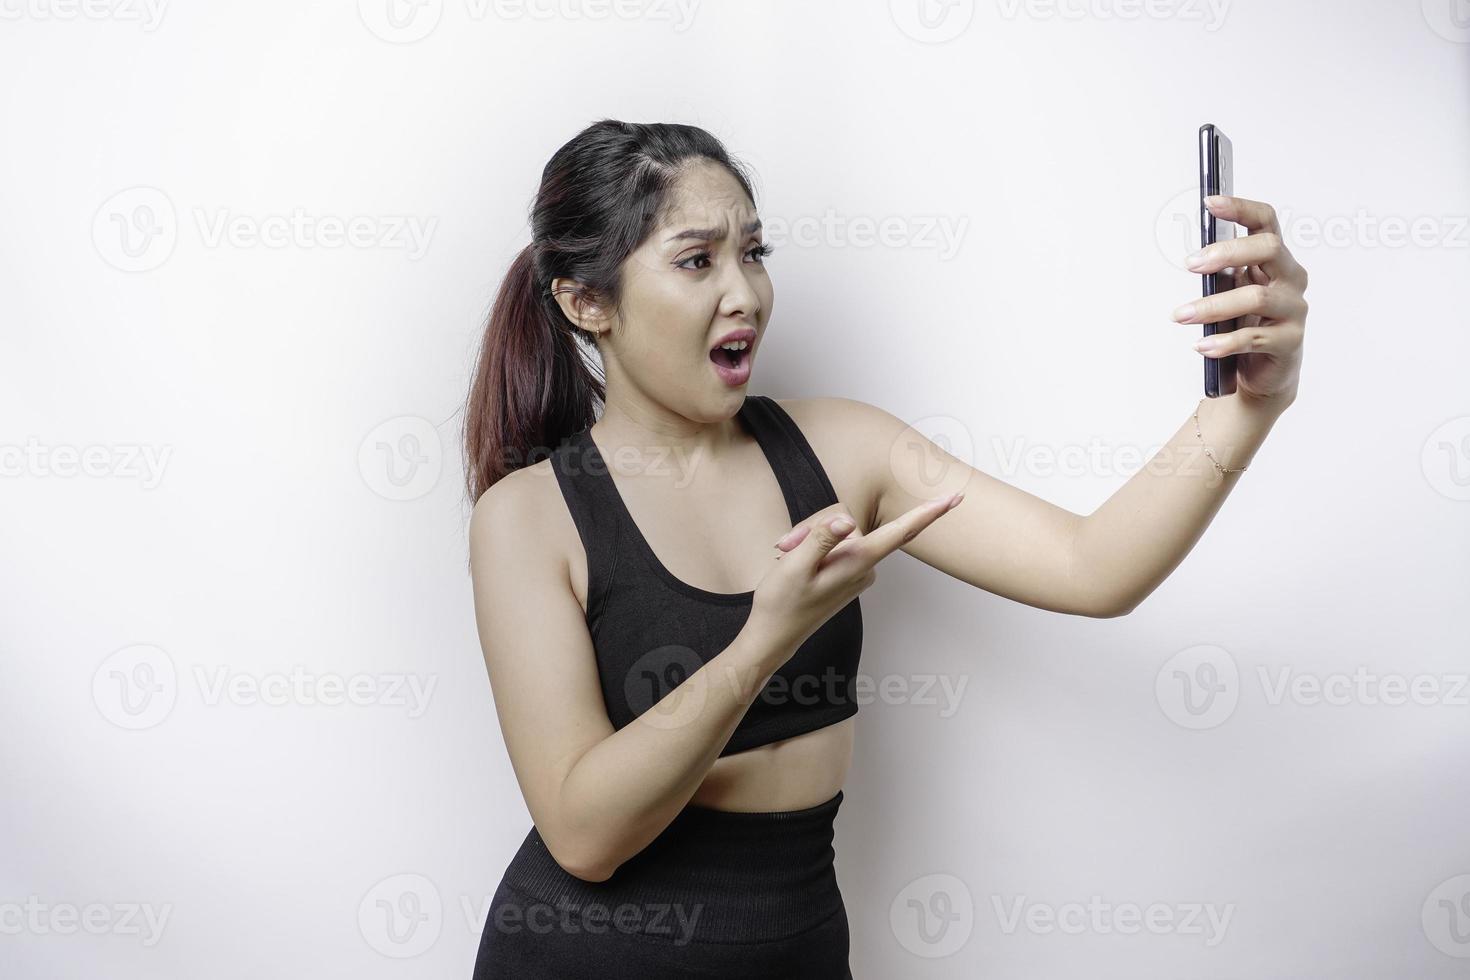 A dissatisfied sporty Asian woman looks disgruntled wearing sportswear irritated face expressions holding her phone photo